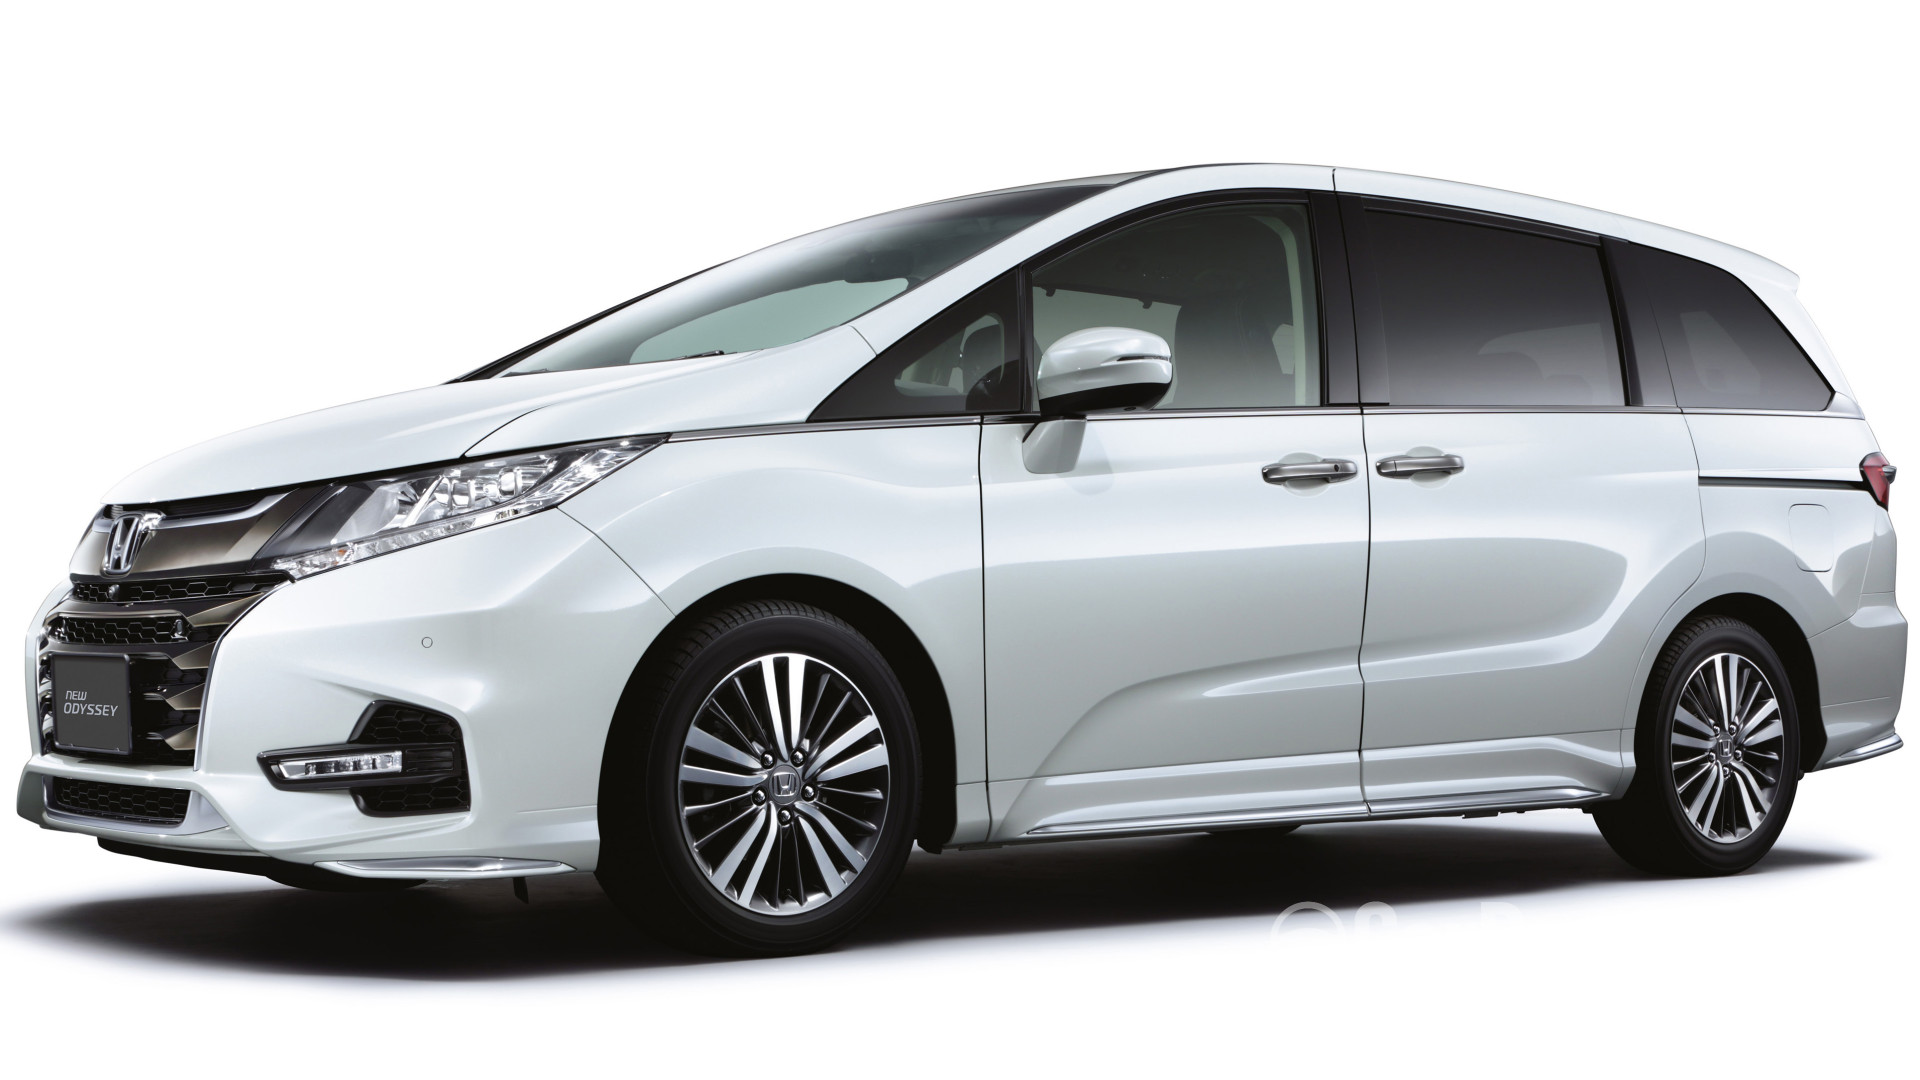 Honda Odyssey RC1 Facelift (2018) Exterior Image in Malaysia - Reviews